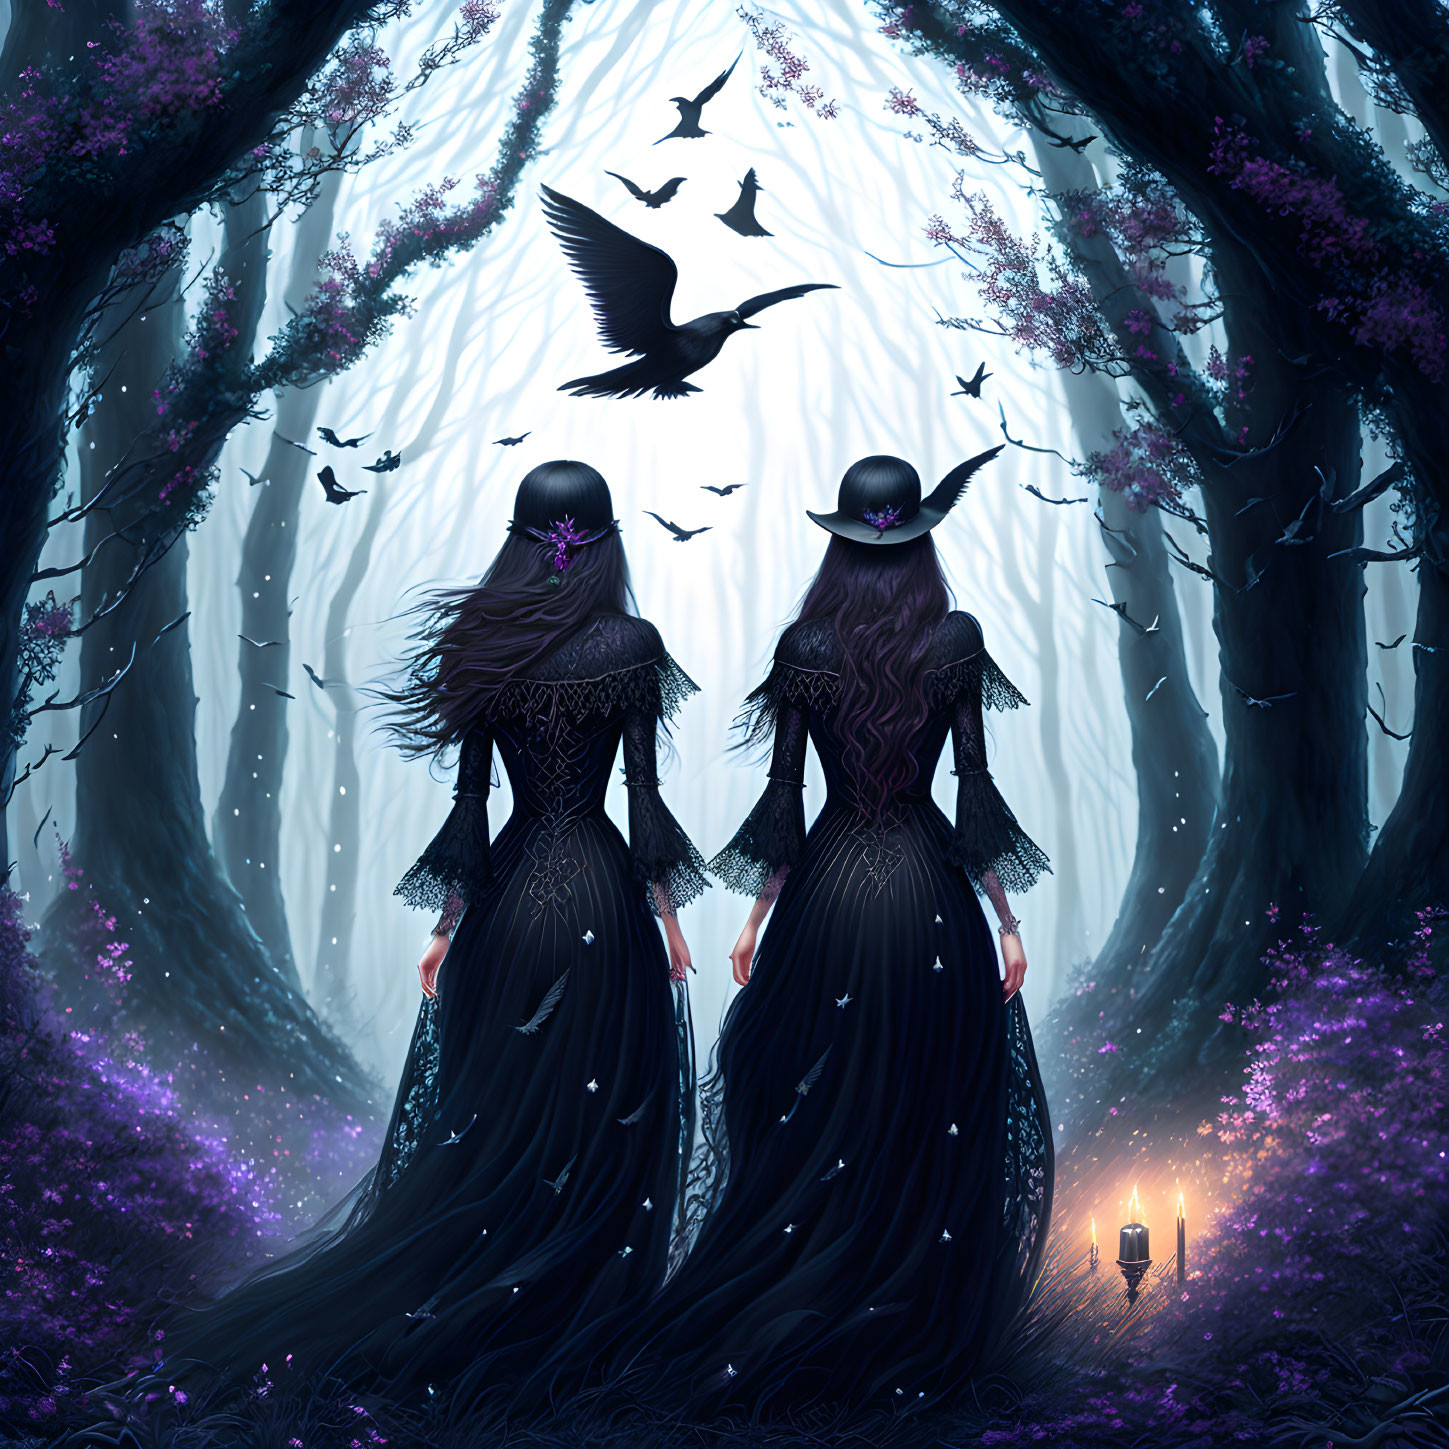 Two women in black gowns and hats in mystical forest with ravens and purple flowers.